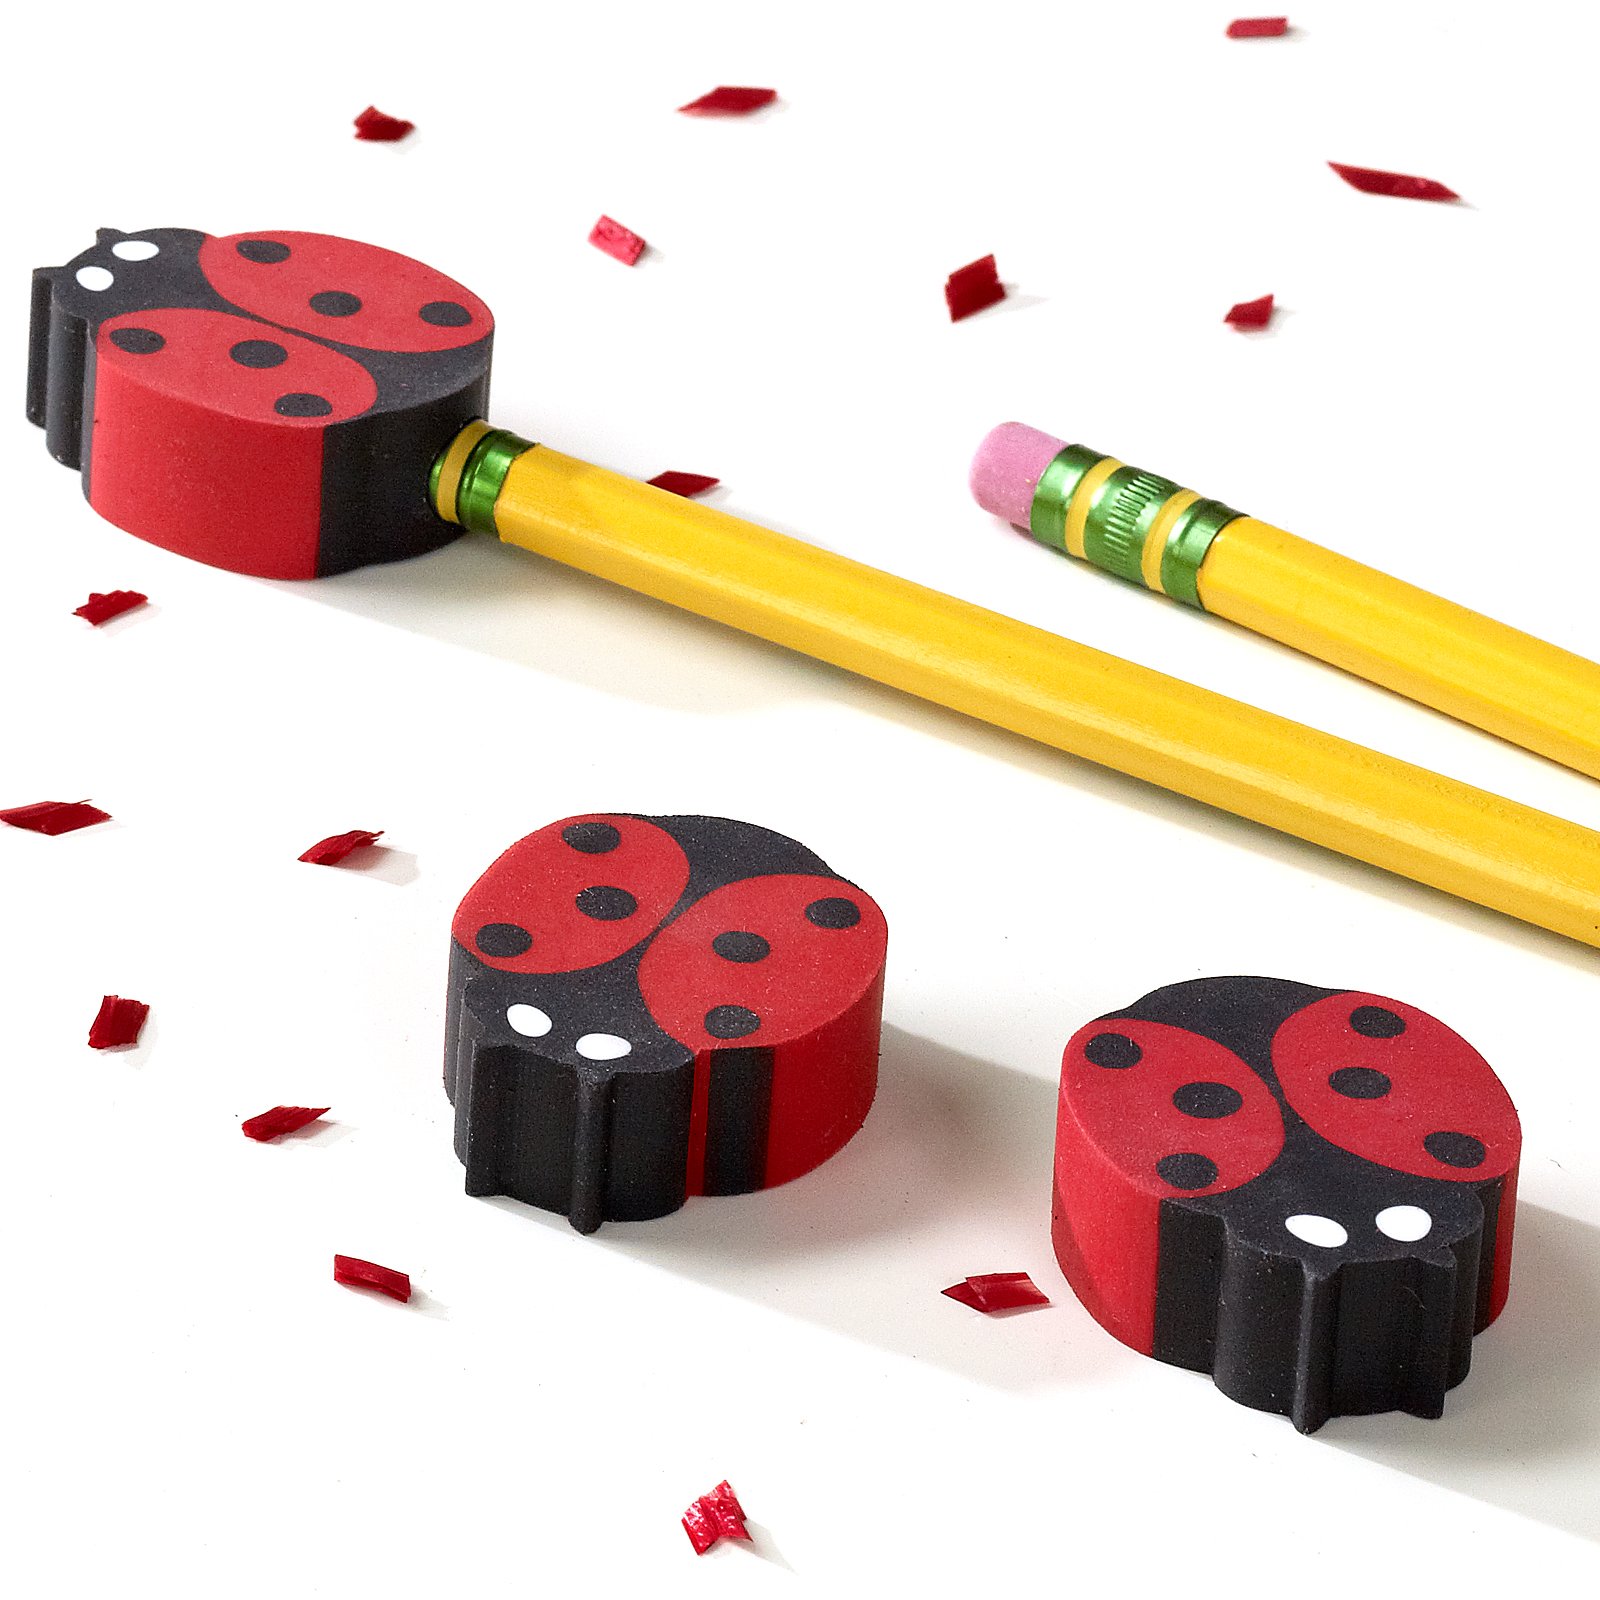 Ladybug Eraser Toppers (8 count) - Click Image to Close